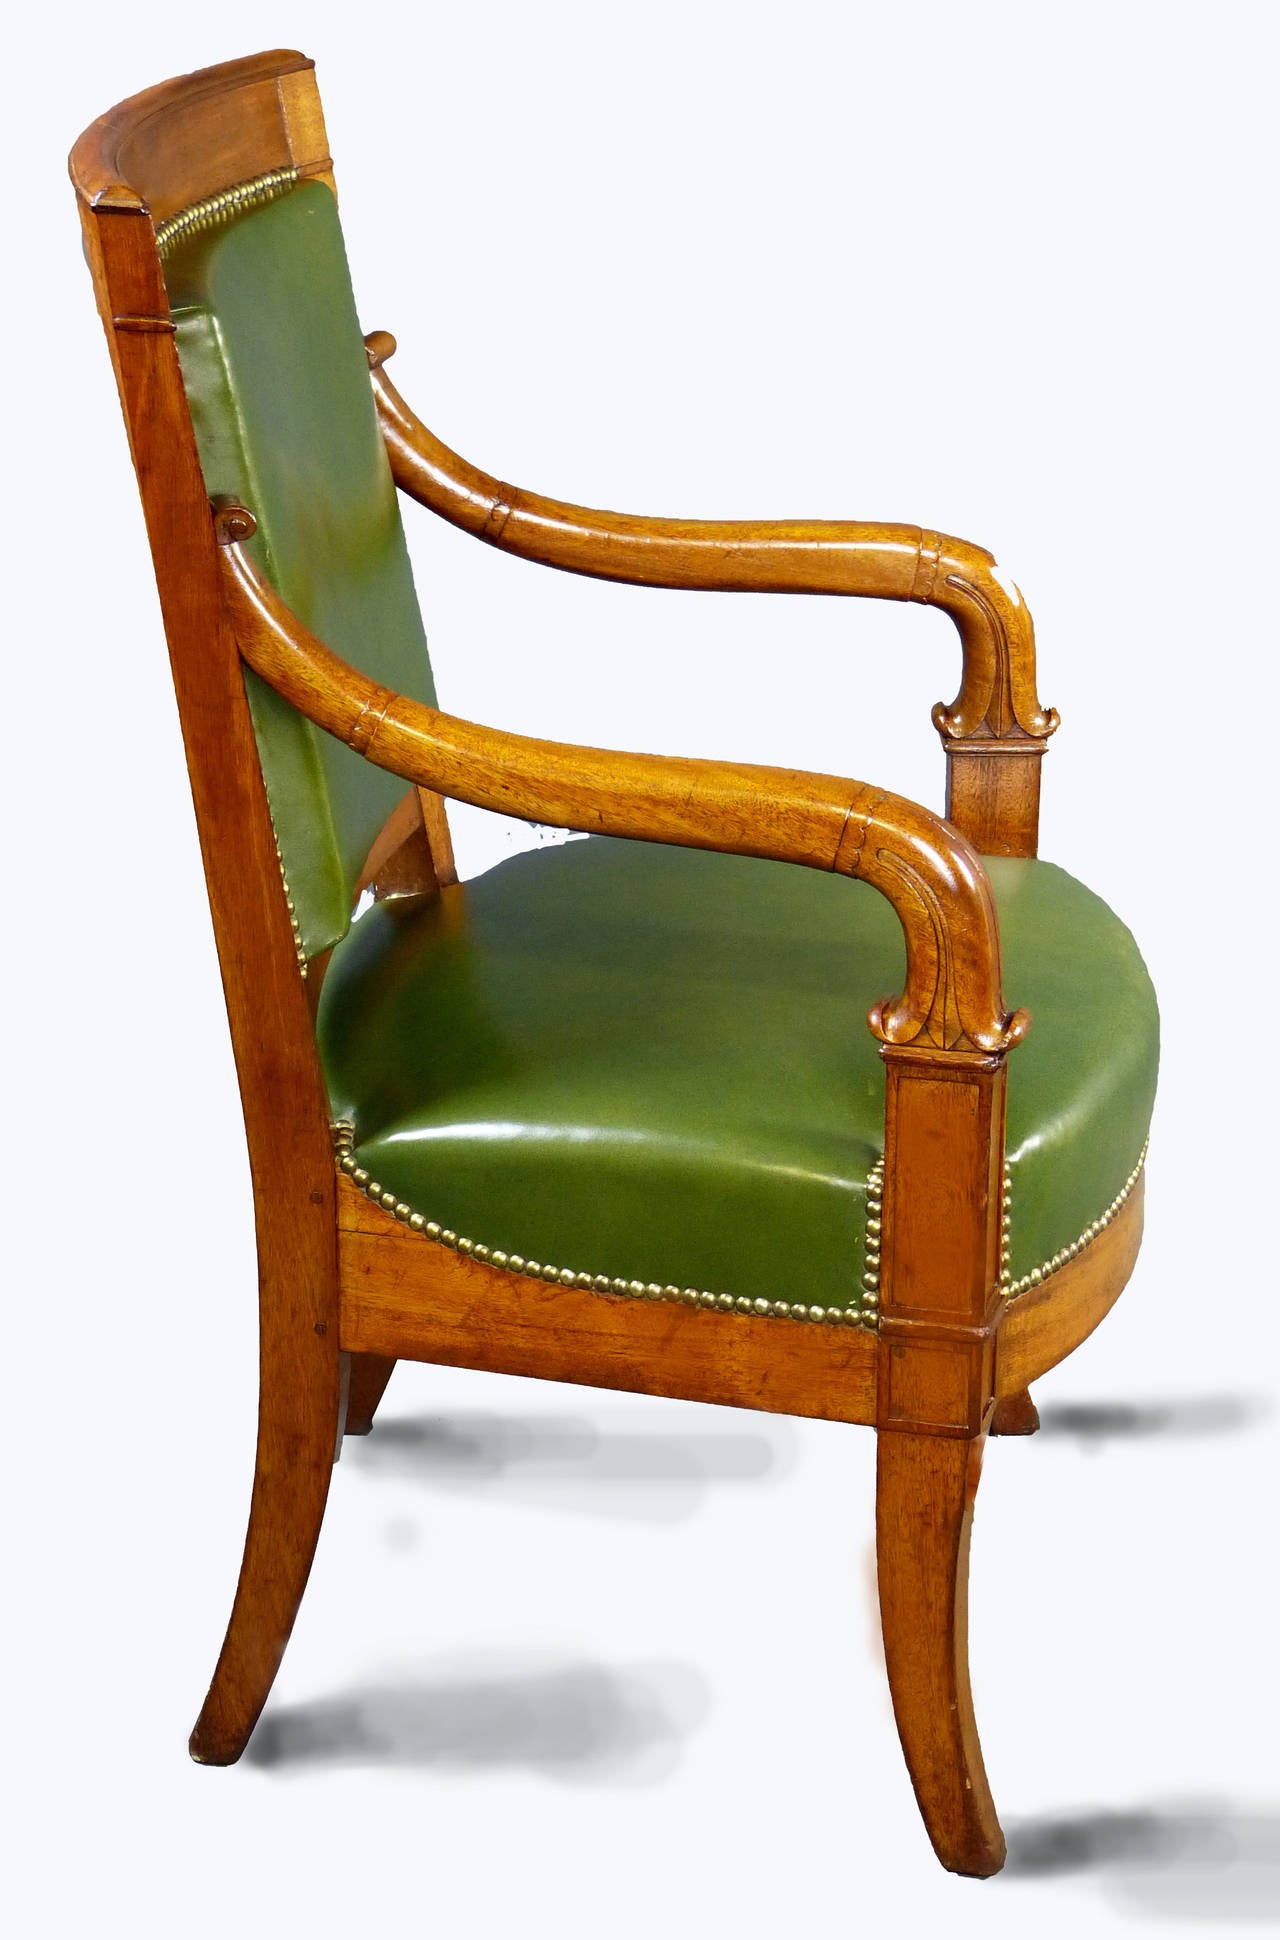 French blond mahogany armchair of the Louis Philippe period, middle of 19th century, with its patina and original condition beautifully preserved. The curved arms terminate in stylised dolphin head carvings. Front and rear sabre shaped legs.